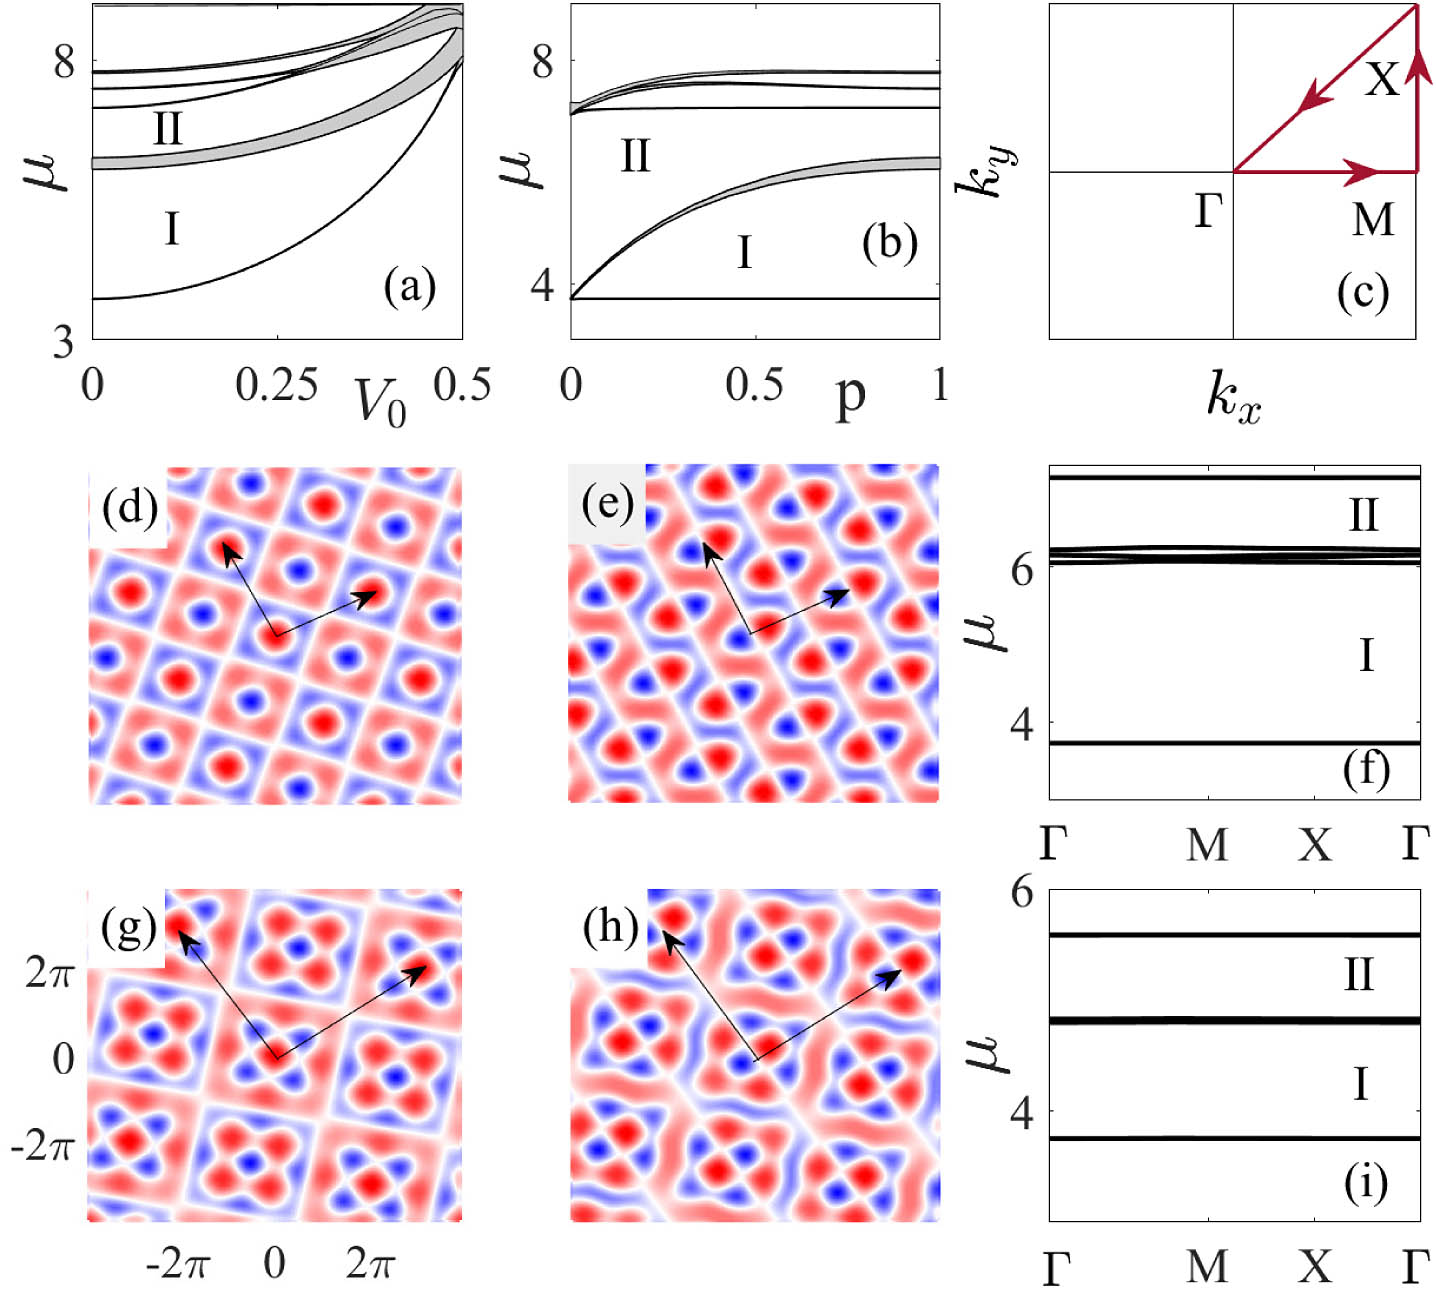 Bandgap structures for 2D PT symmetric moiré optical lattices at θ=arctan(3/4) with increasing imaginary potential strength V0 (a) and strength contrast p (b). (c) First Brillouin zone in 2D reciprocal space. Contour plots of the real (d), (g) and imaginary (e), (h) parts of the lattice (blue, lattice potential minima; red, lattice potential maxima) at θ=arctan(3/4) (d), (e) and θ=arctan(5/12) (g), (h), and their corresponding bandgap diagrams (f), (i) at V0=0.02 and p=1 in reduced zone representation. I and II in (f), (i) represent the first and second bandgaps.